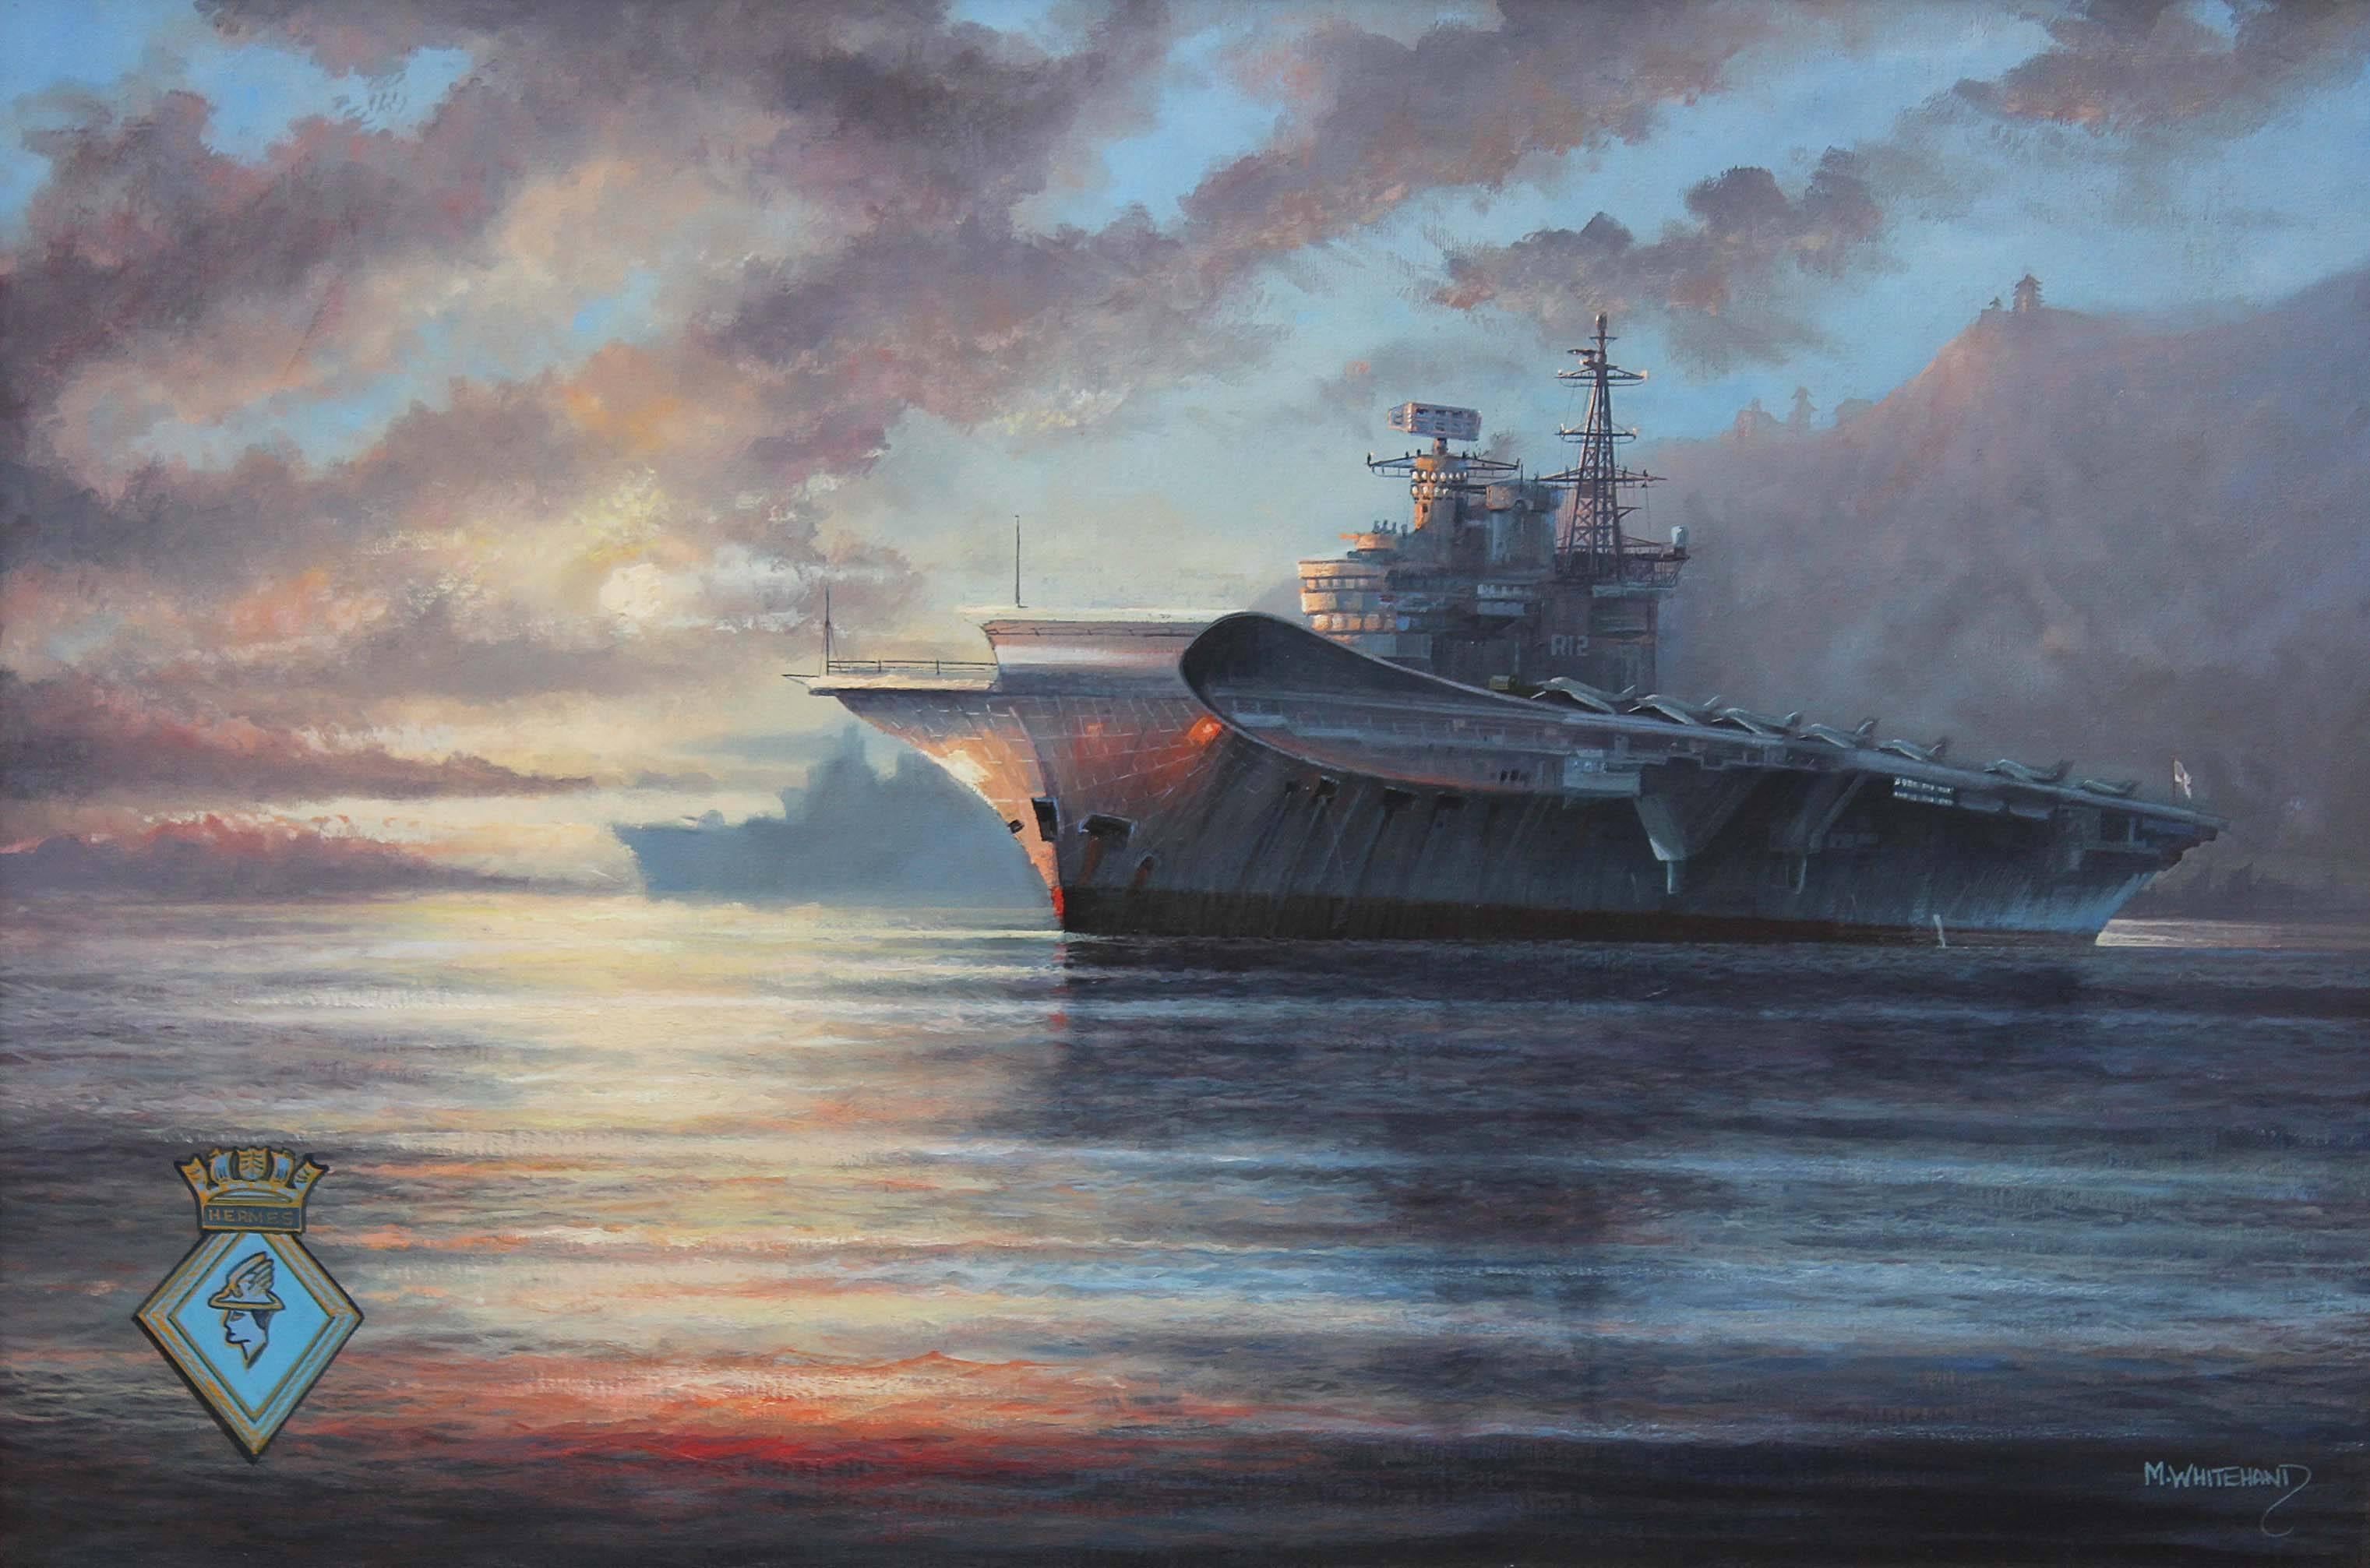 Quality large oil painting Michael James Whitehand of the British HMS Hermes aircraft carrier shortly after the Falklands War.
This is a fantastic painting with a great atmosphere and use of light.

Similar sized paintings by this artist have